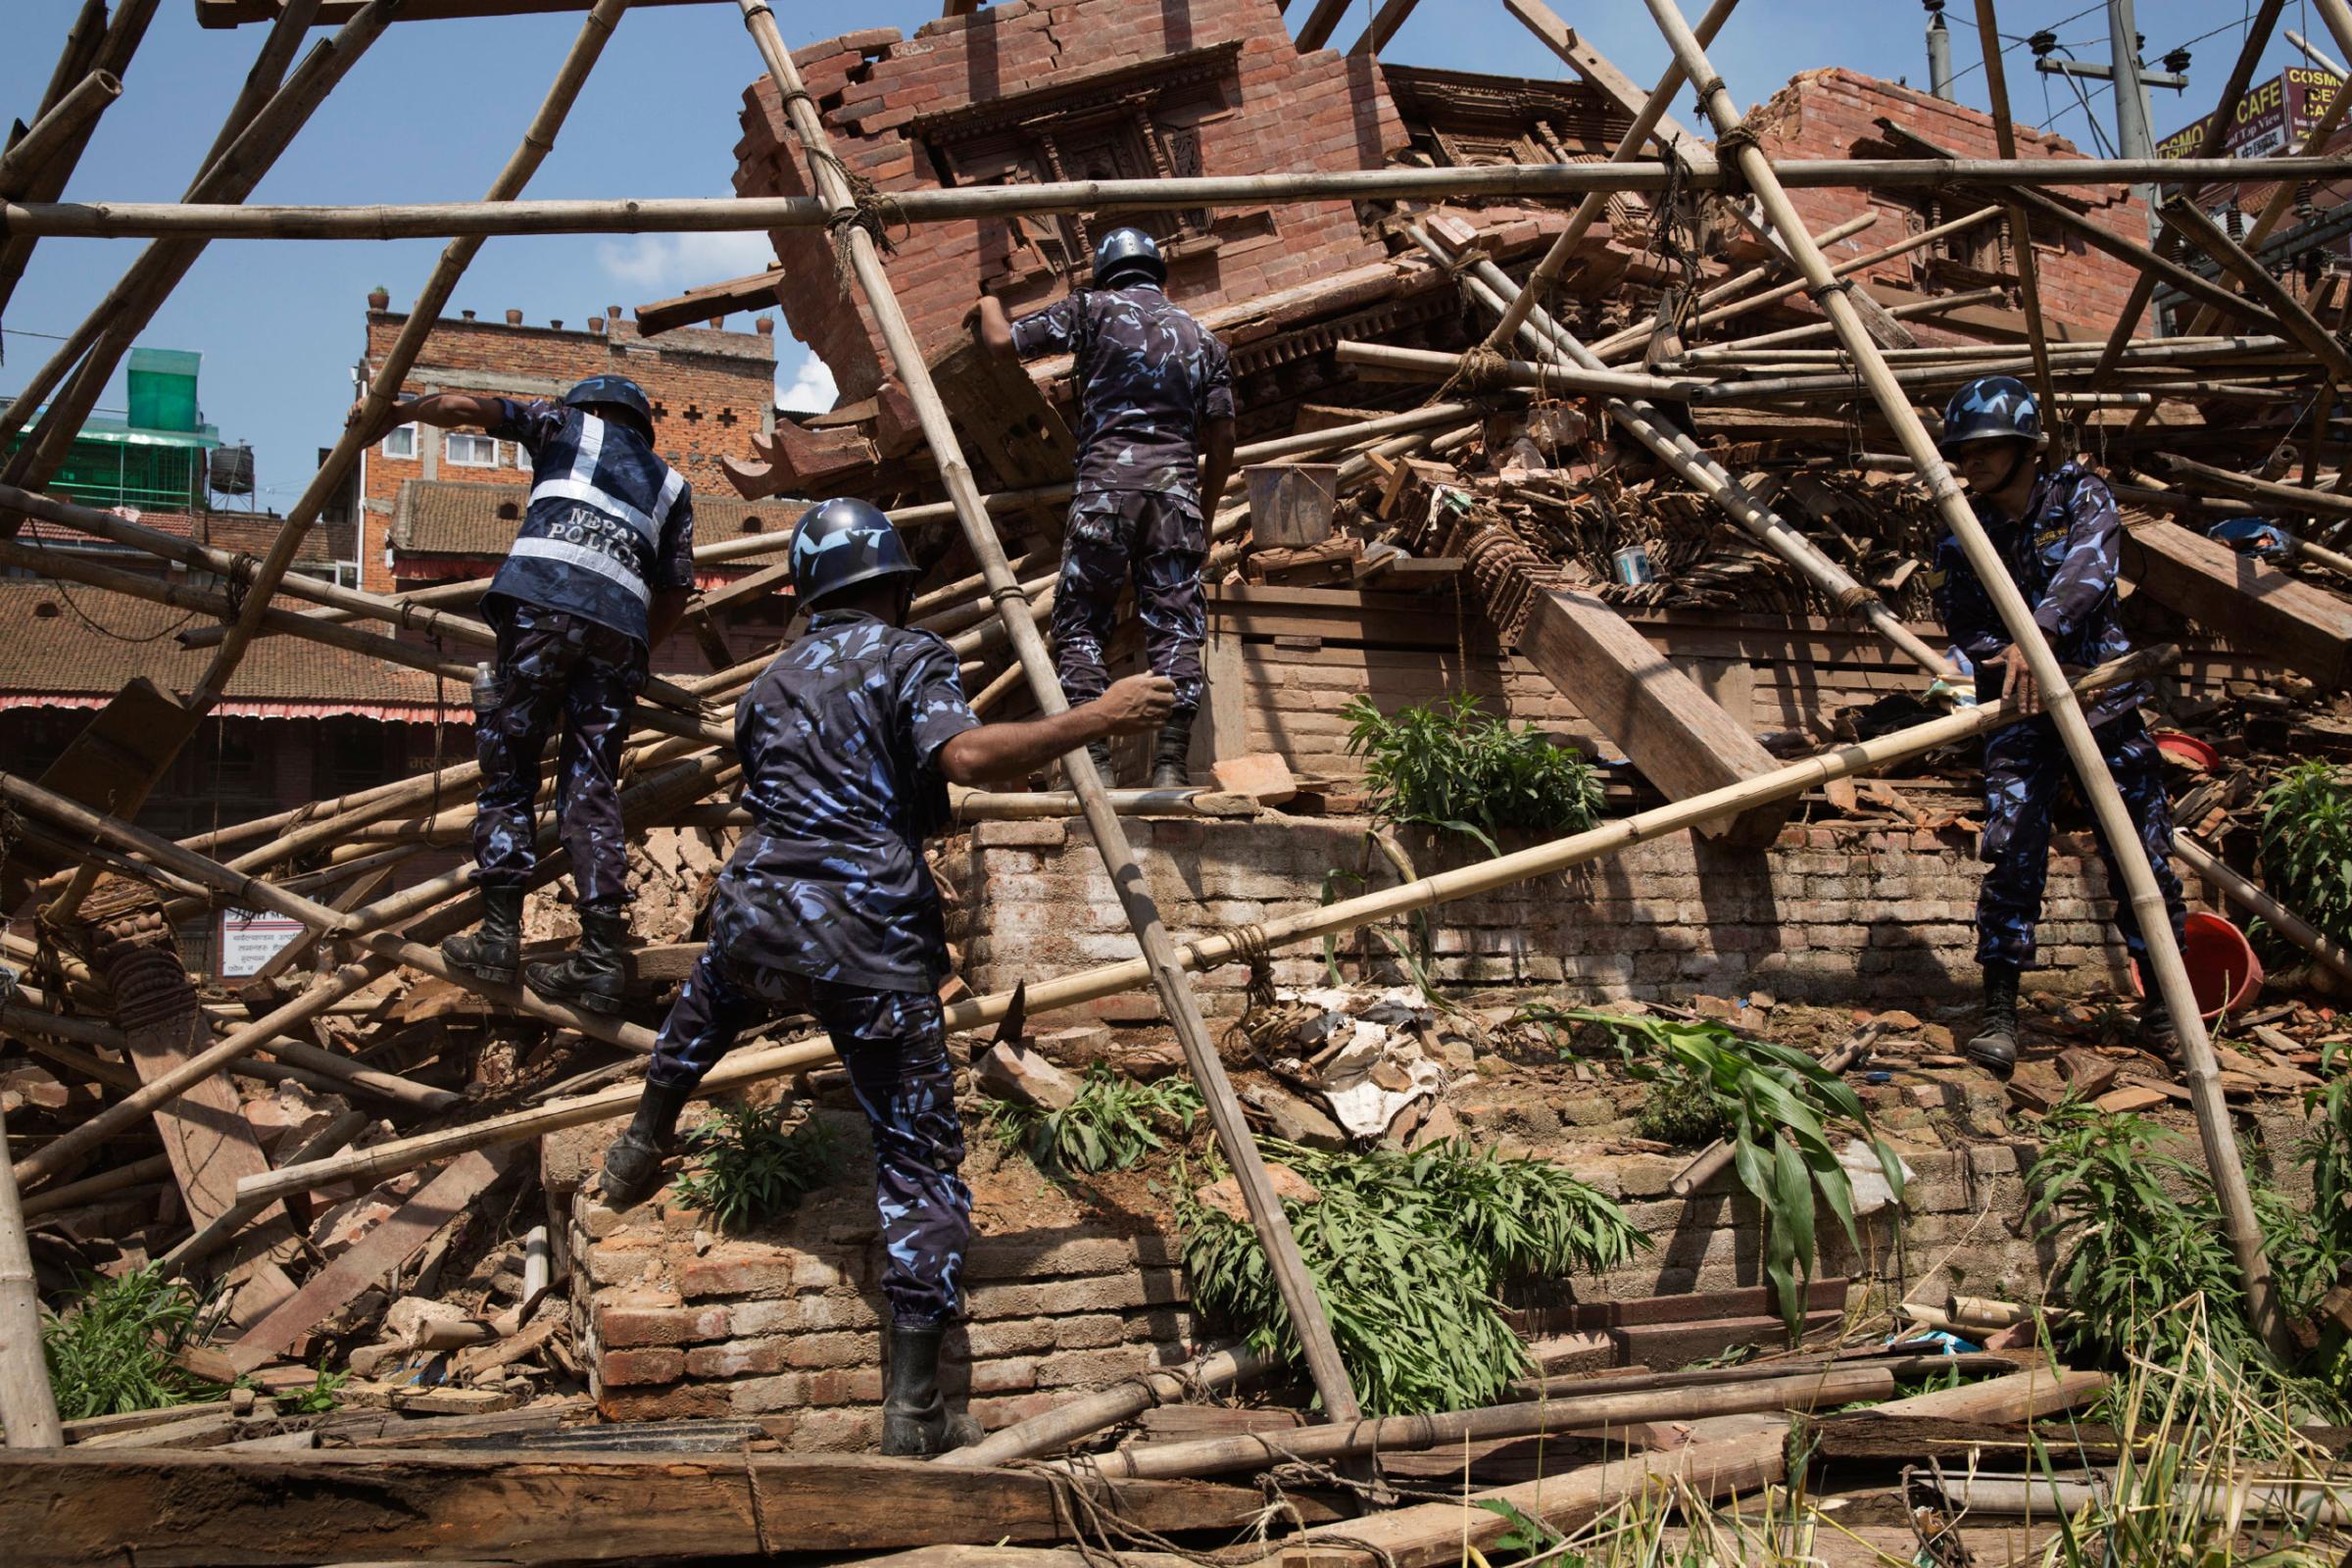 Nepali forces clear fallen bamboo from ruins in Durbar Square, Kathmandu, Nepal on April. 26, 2015. The historic Durbar Square, a UNESCO world heritage site, was severely damaged in an earthquake on April 25th. Photo by Adam Ferguson for Time